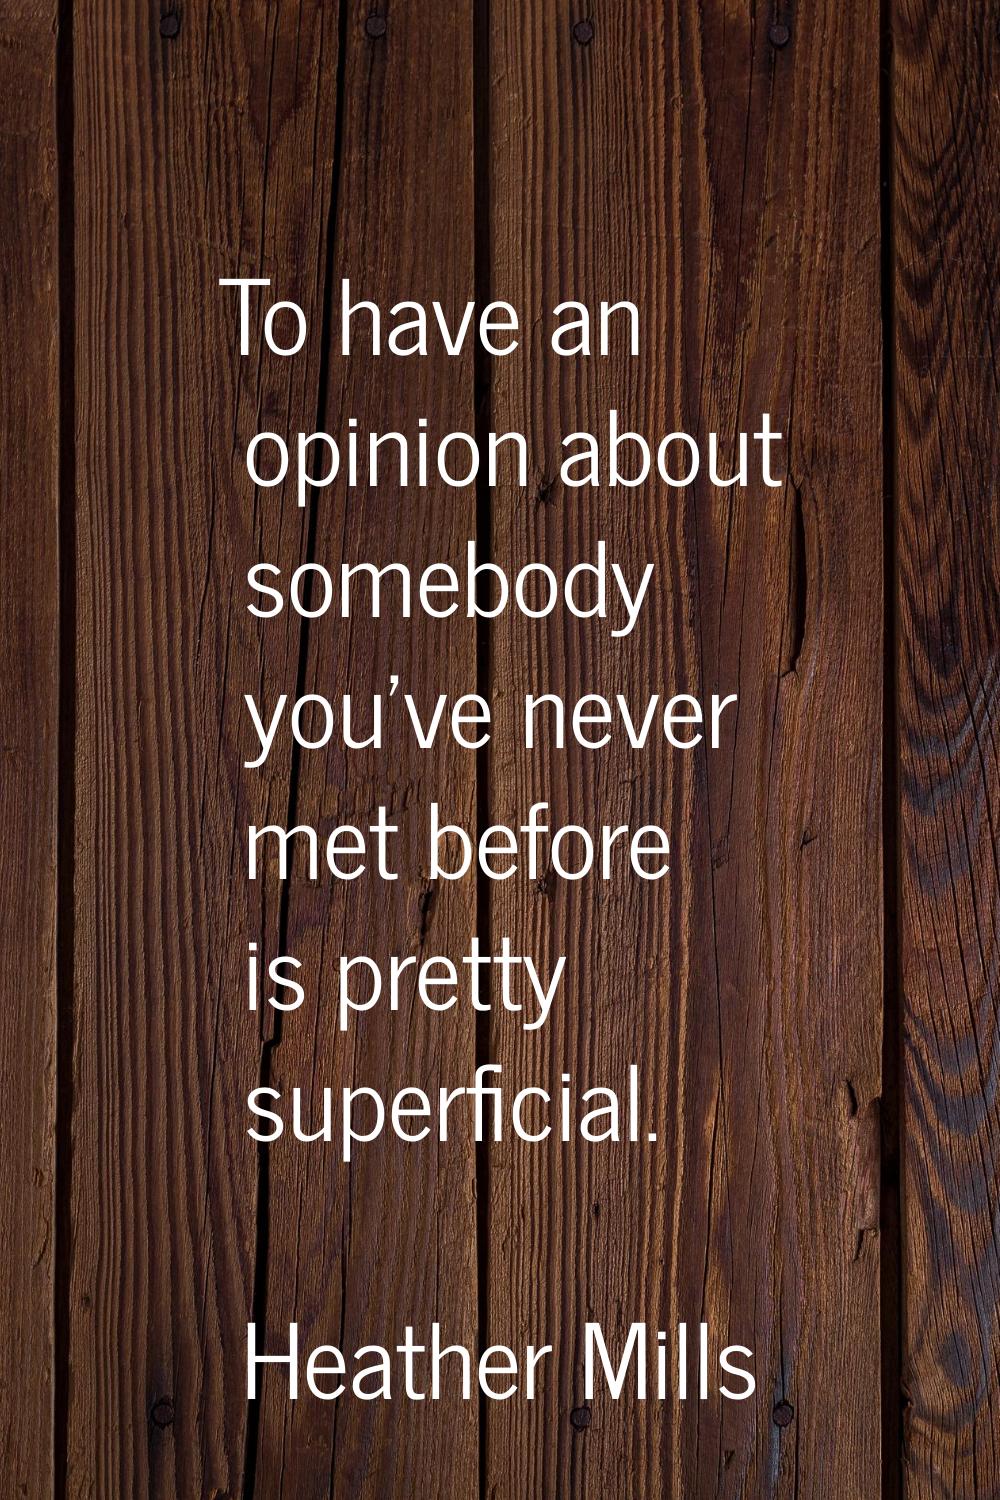 To have an opinion about somebody you've never met before is pretty superficial.